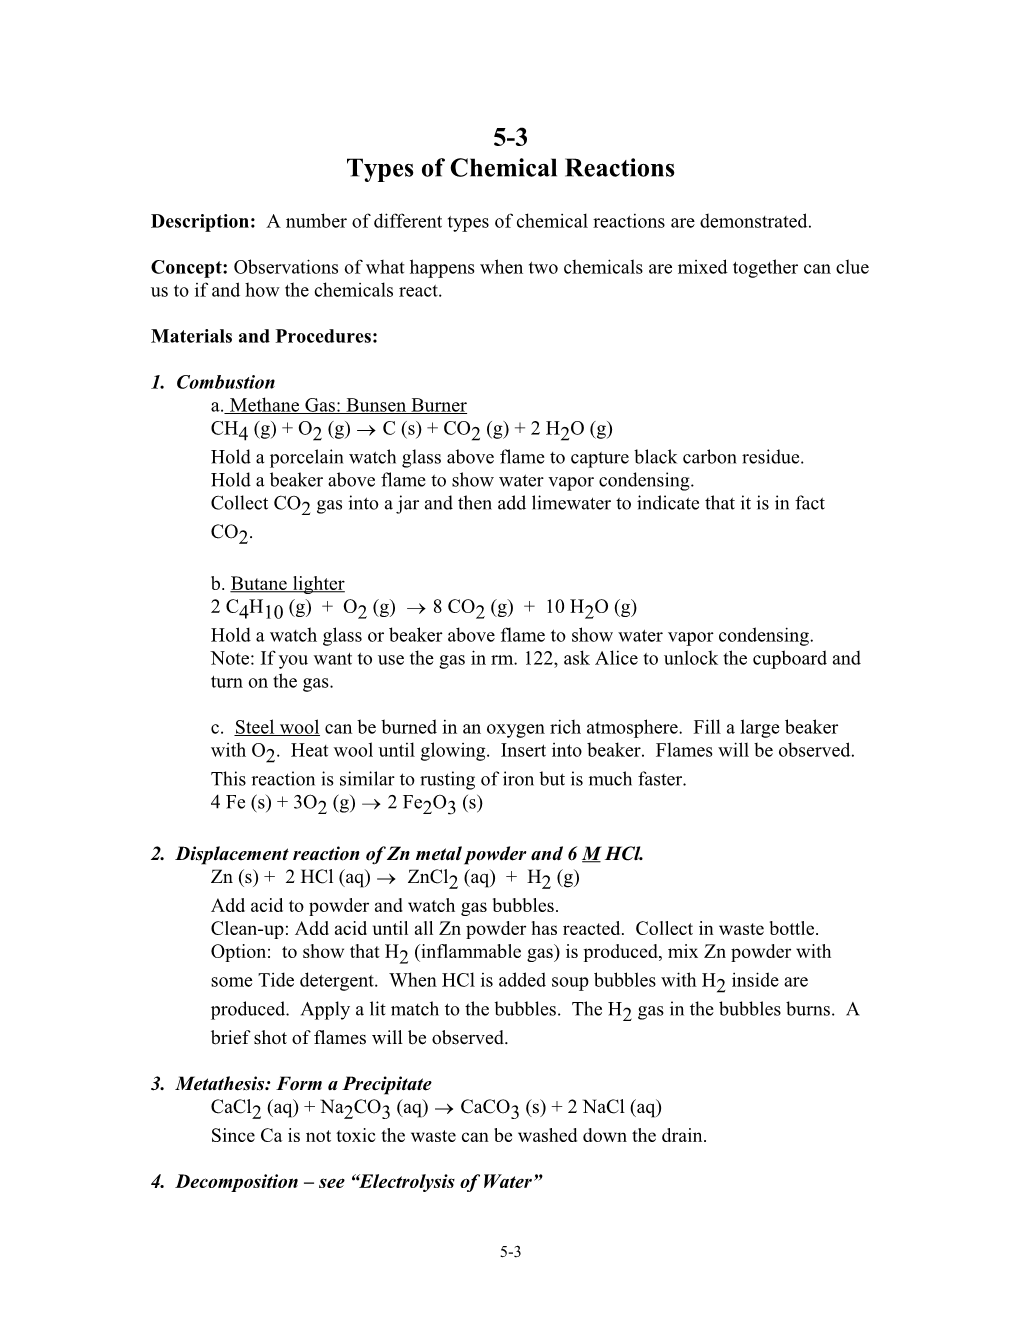 Types of Chemical Reactions s4